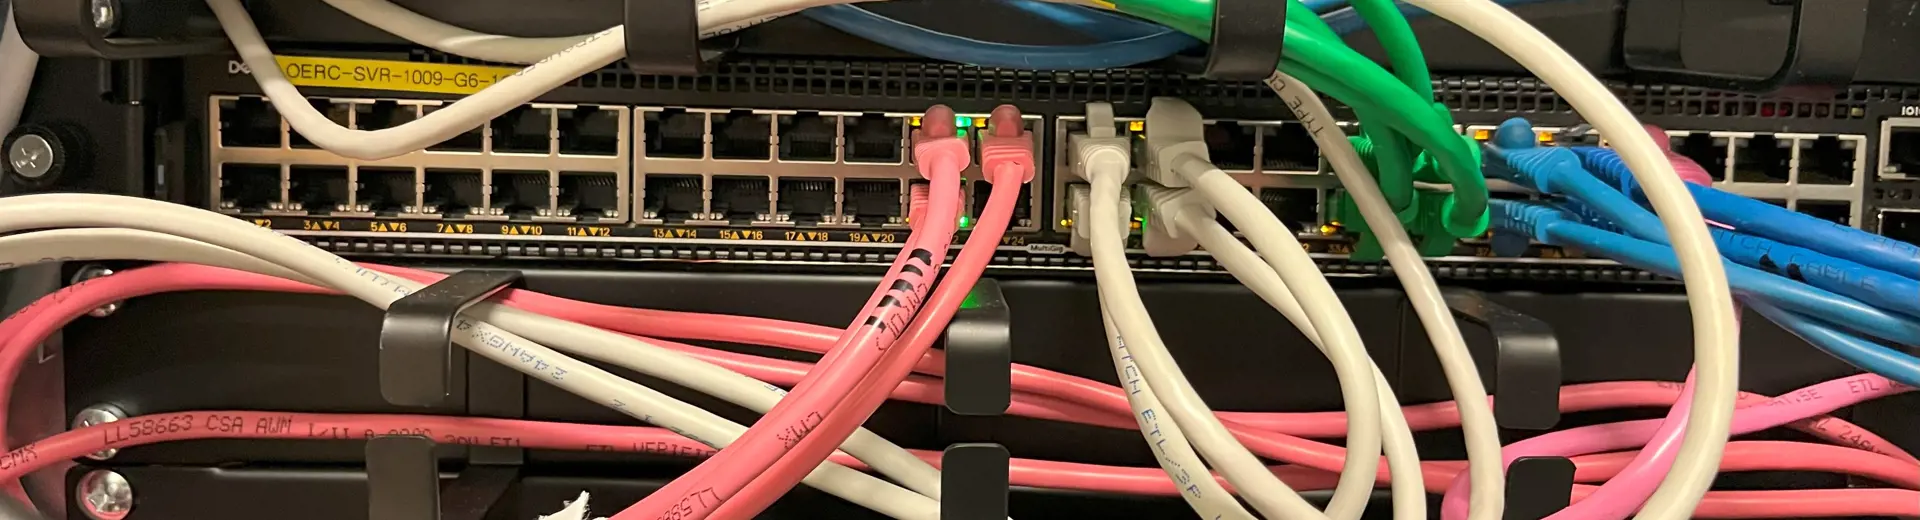 brightly coloured computer cables